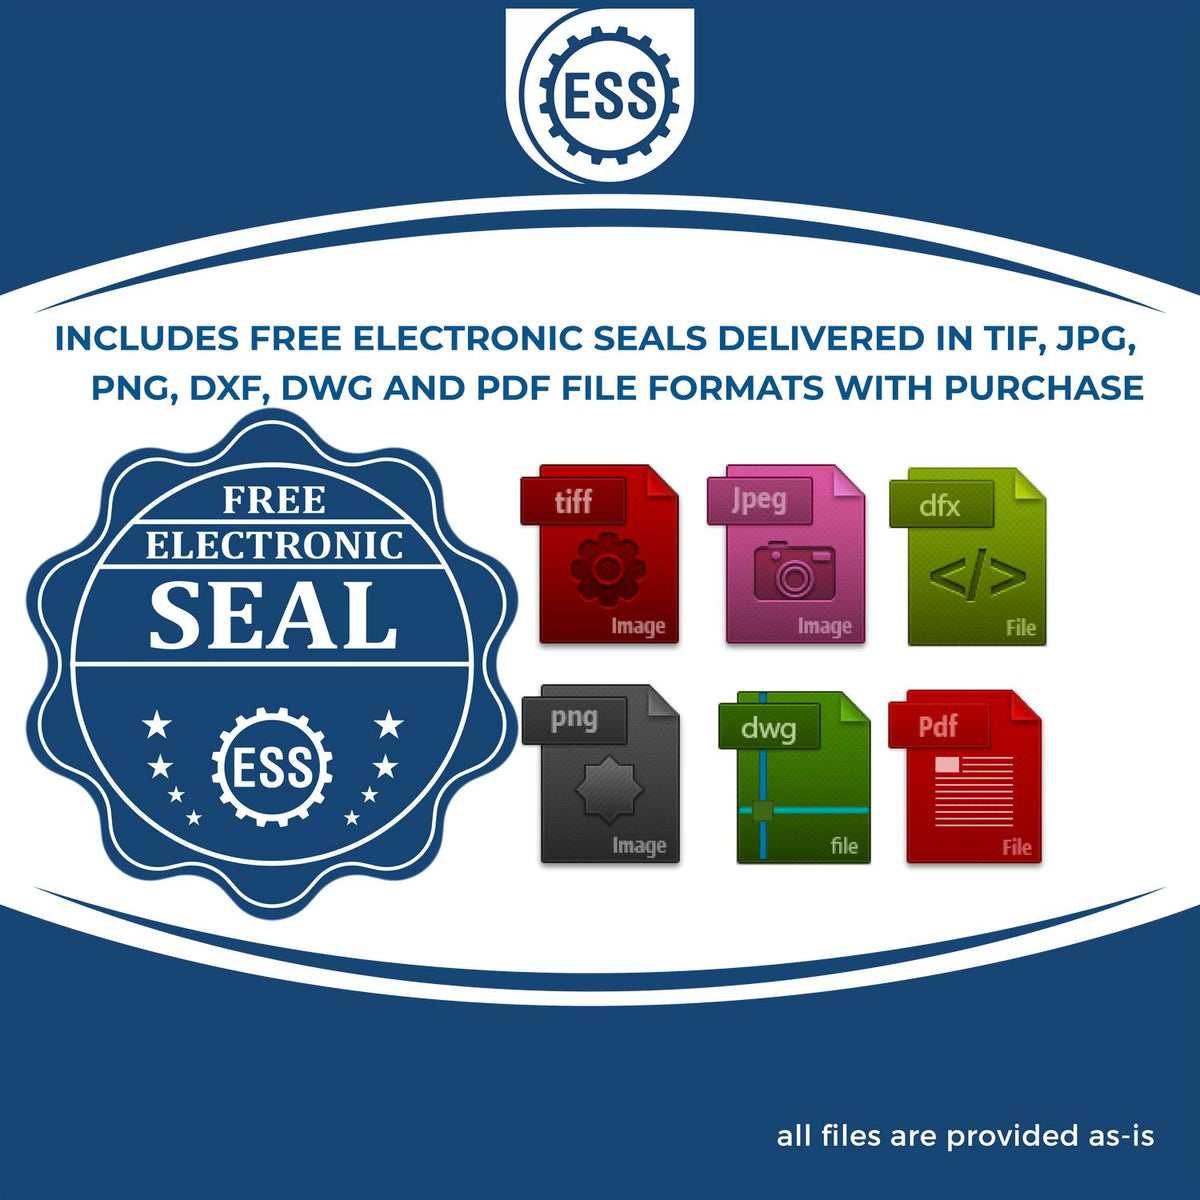 An infographic for the free electronic seal for the Arizona Desk Architect Embossing Seal illustrating the different file type icons such as DXF, DWG, TIF, JPG and PNG.